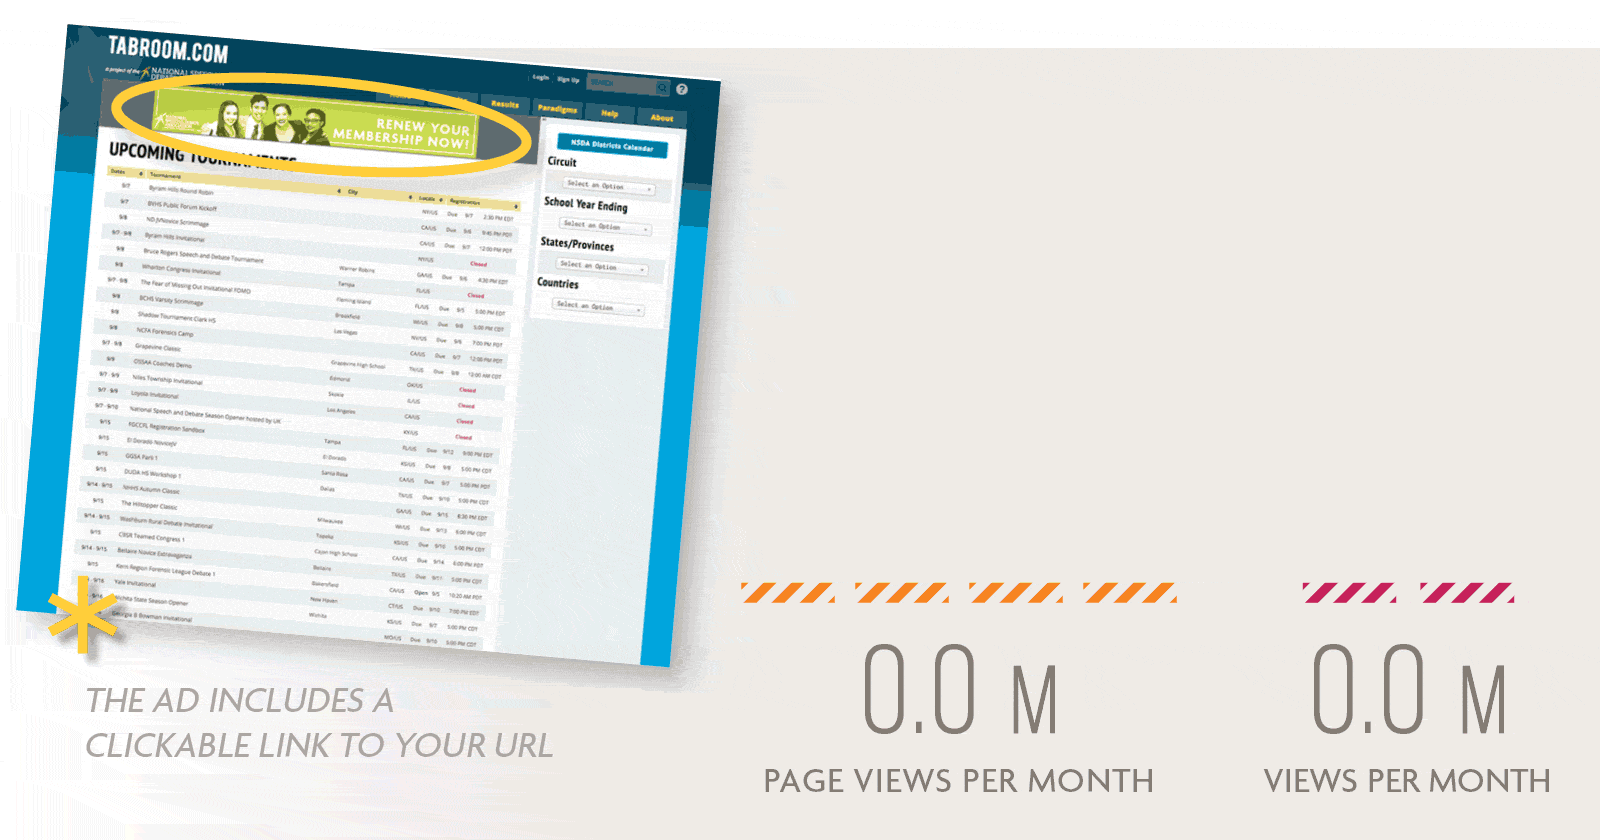 Tabroom Graphic. Millions of views per month. Peak time October-May. 6-10m pageviews per month. Off peak June to September. 2.5-6 Million pageviews per month.